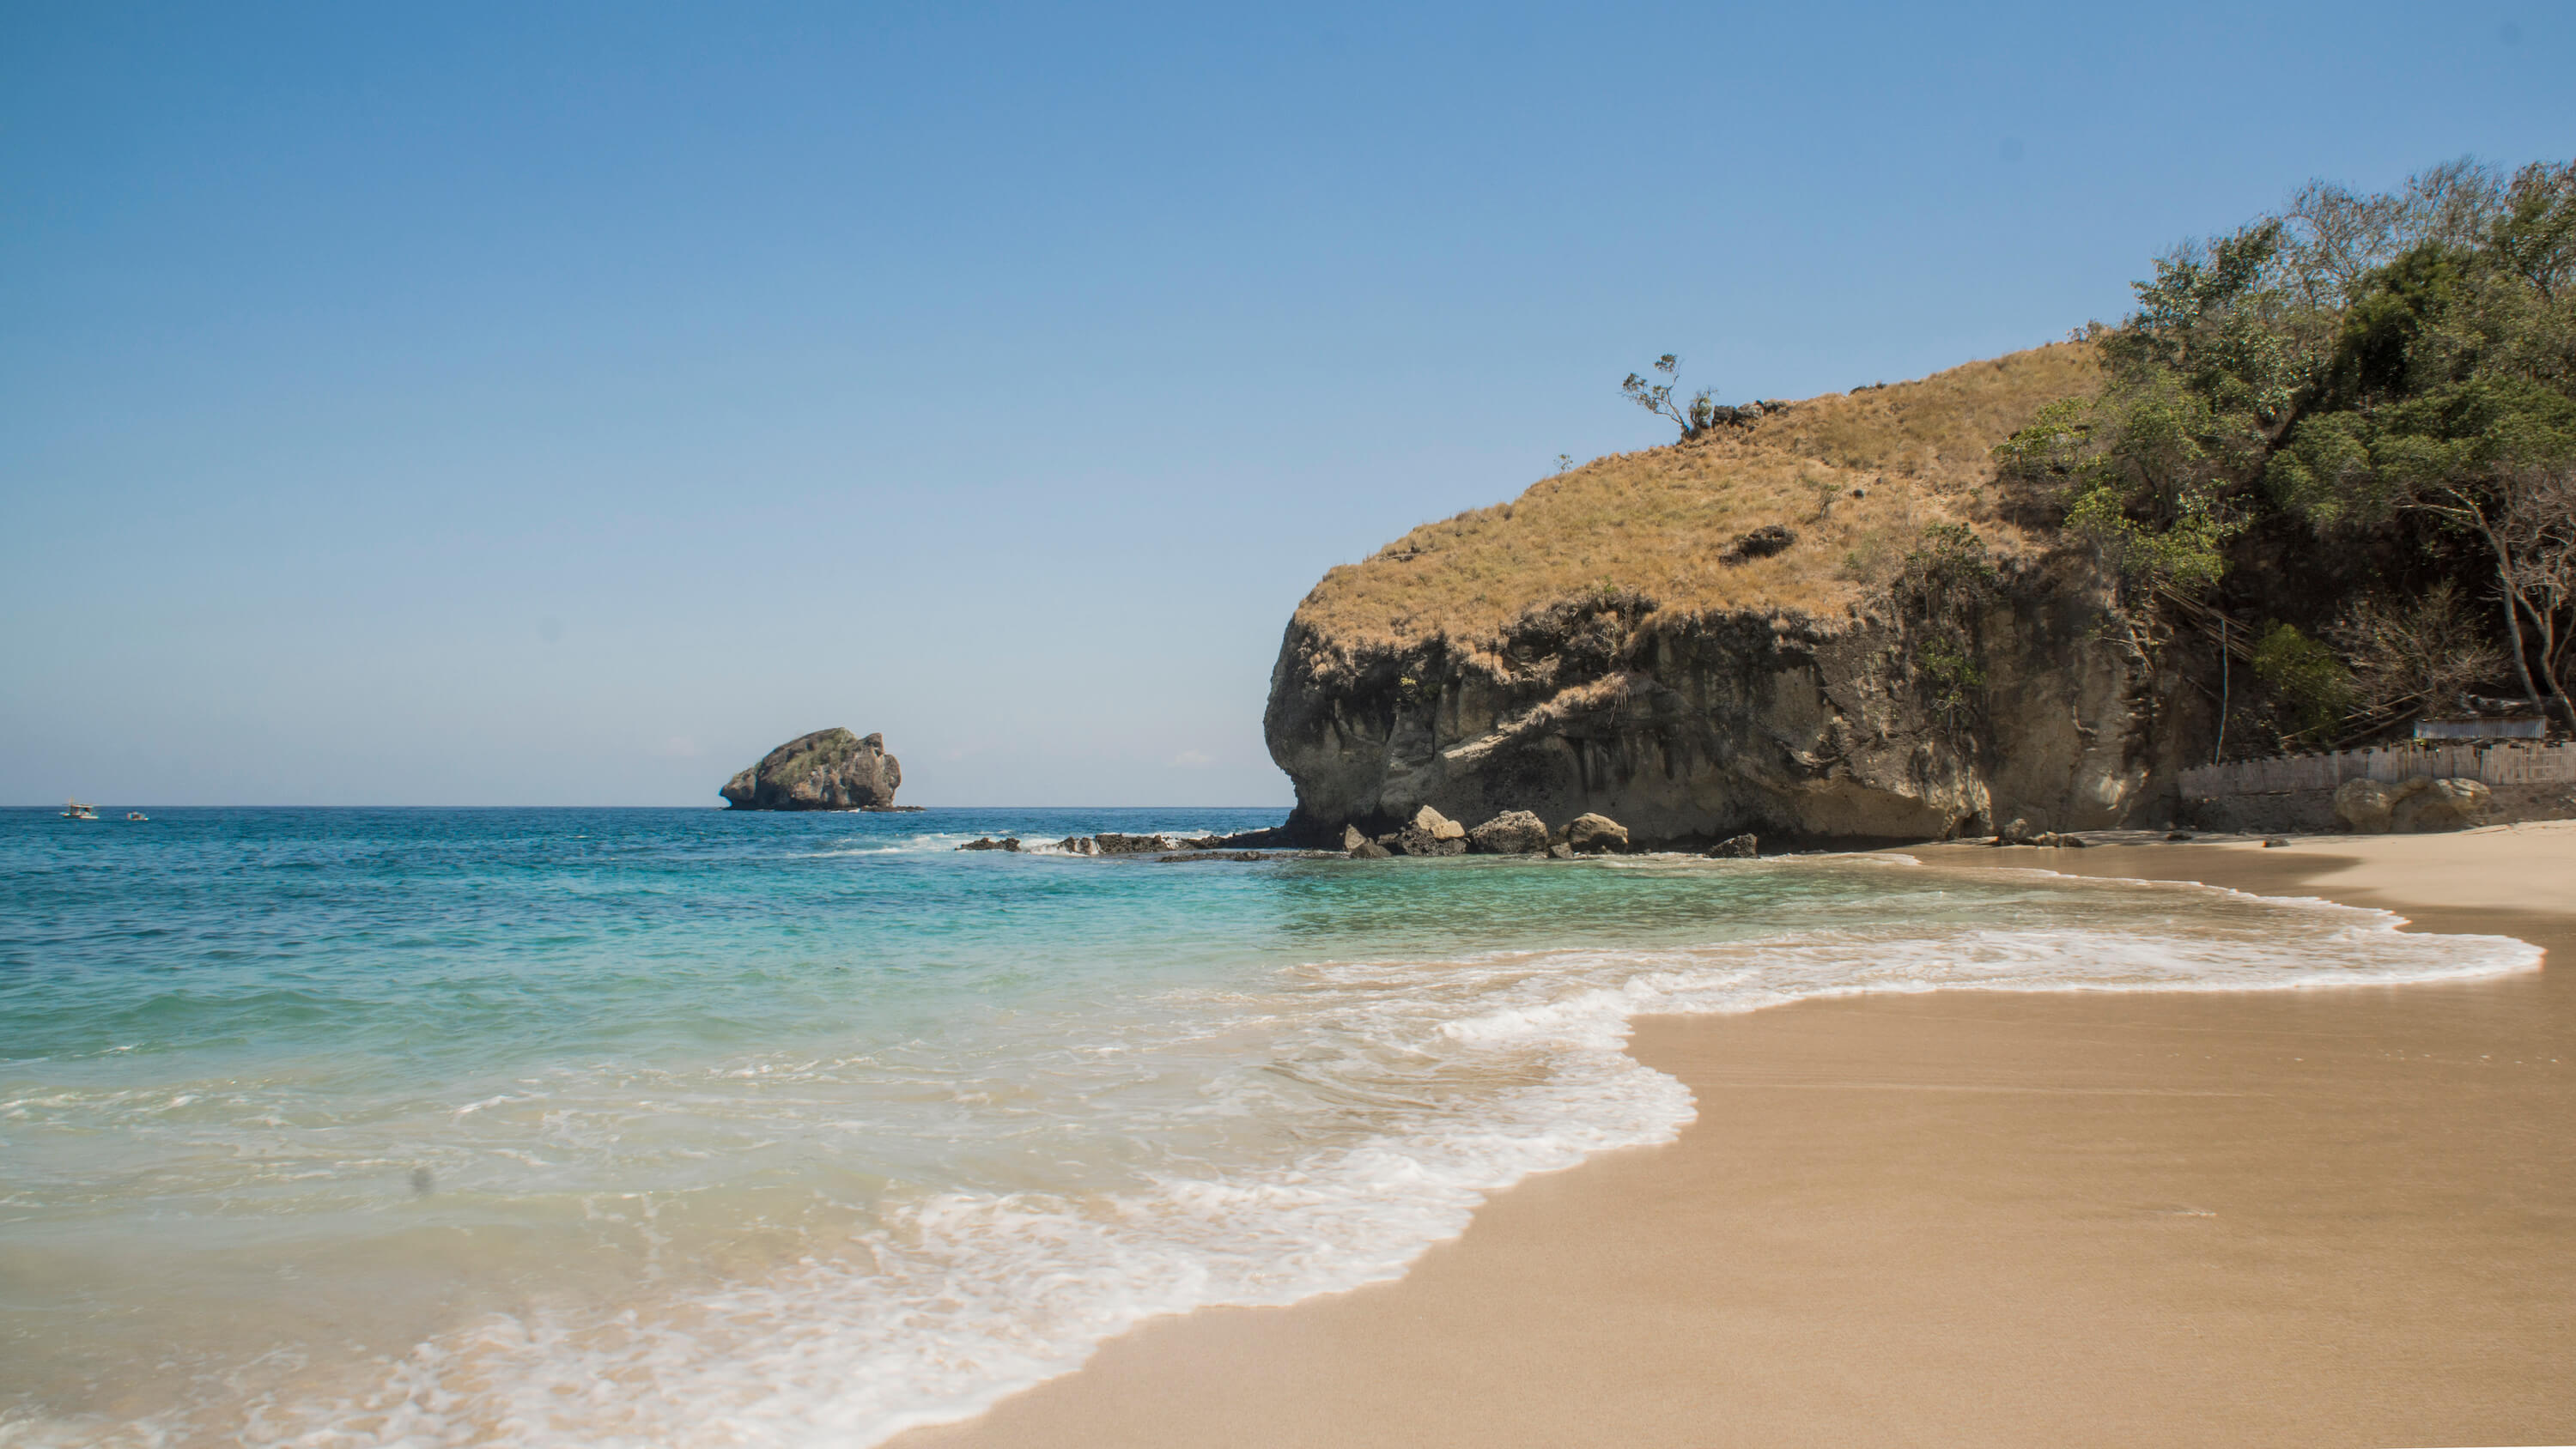 Travellers can also make for Koka beach, which is also popular with locals. Photo by Andra Fembriarto